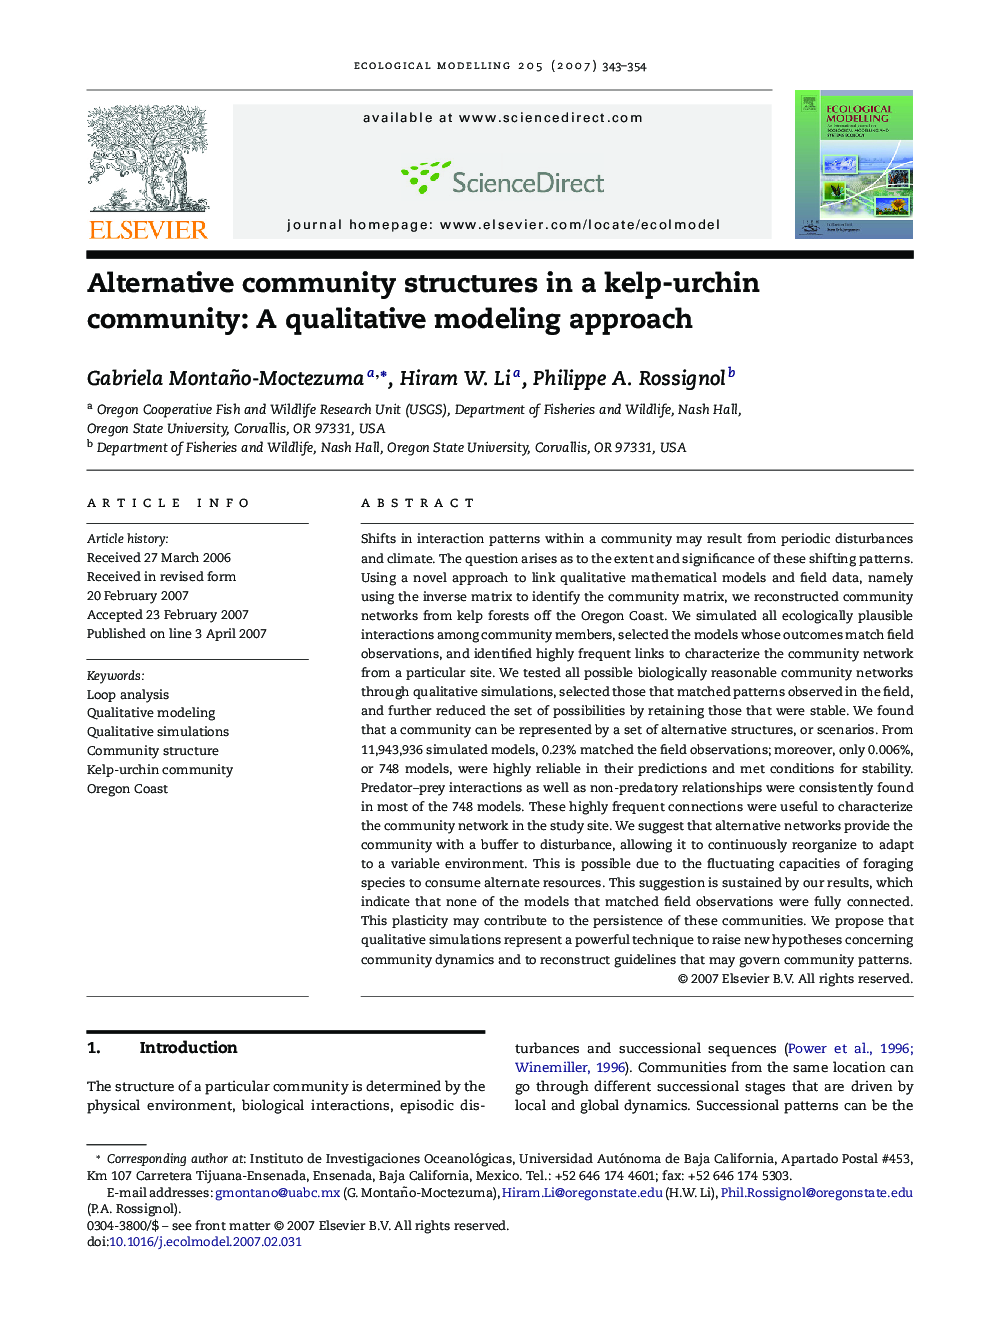 Alternative community structures in a kelp-urchin community: A qualitative modeling approach